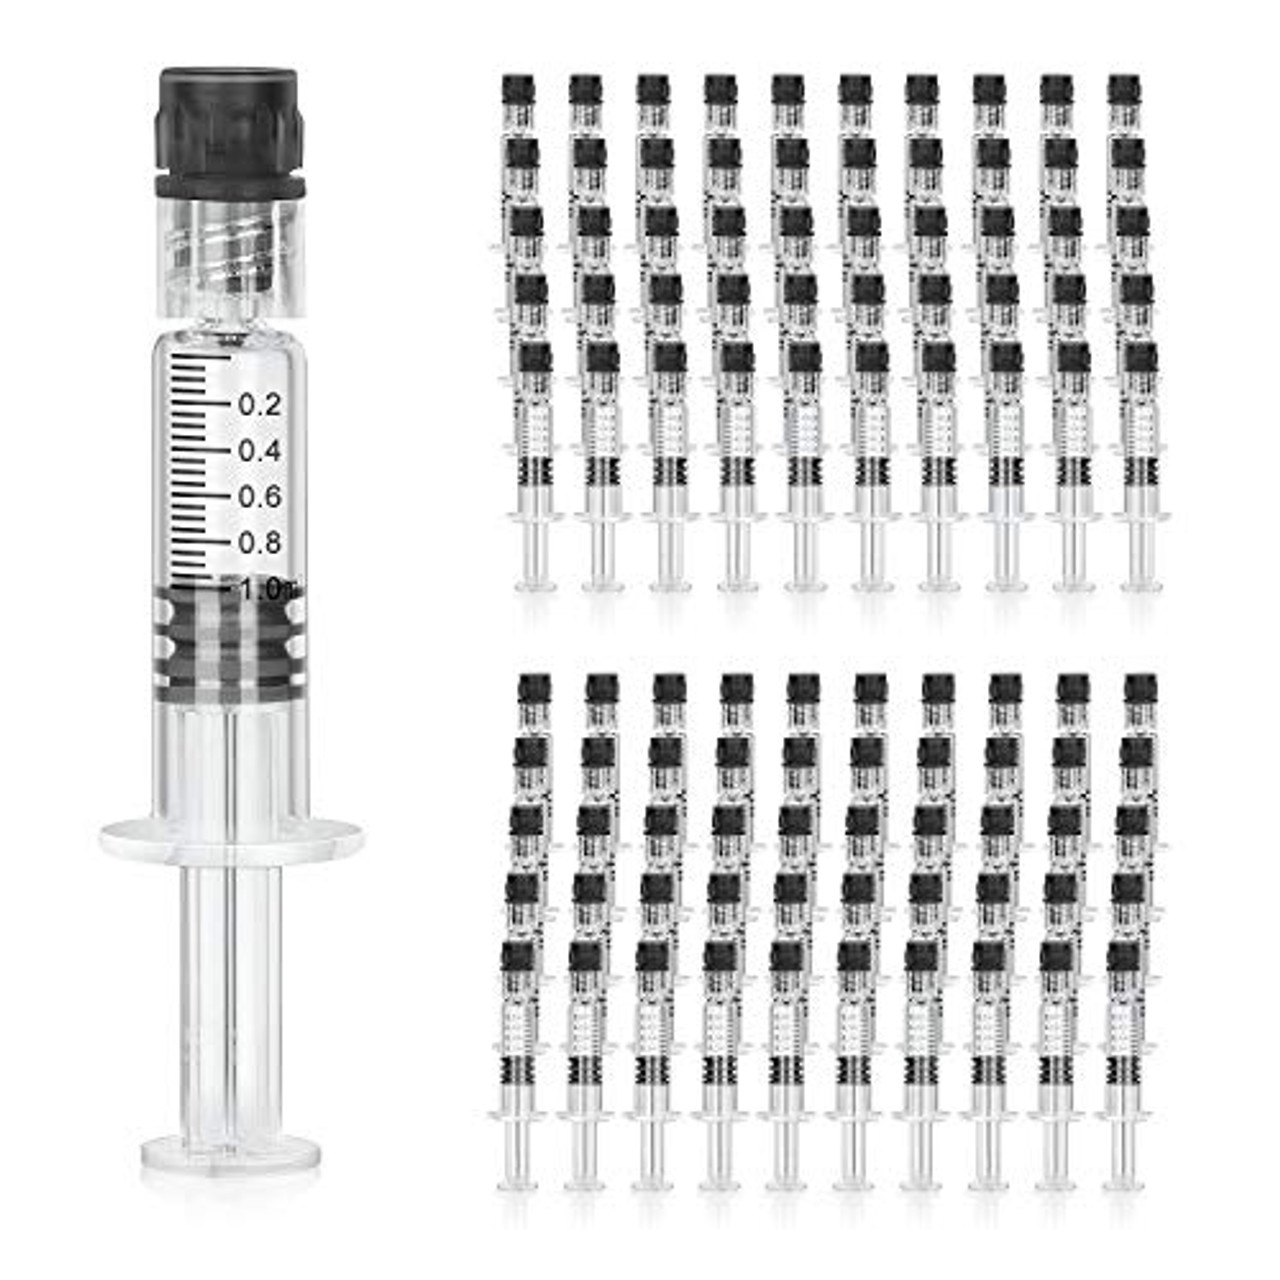 1ml Glass luer Lock Syringe 100 pcs borosillicate Reusable Pyrex Heat  Resistant Tube for lab,Thick Liquids,Oil,Ink with Measurement Markings  Non-Medical Without Needles